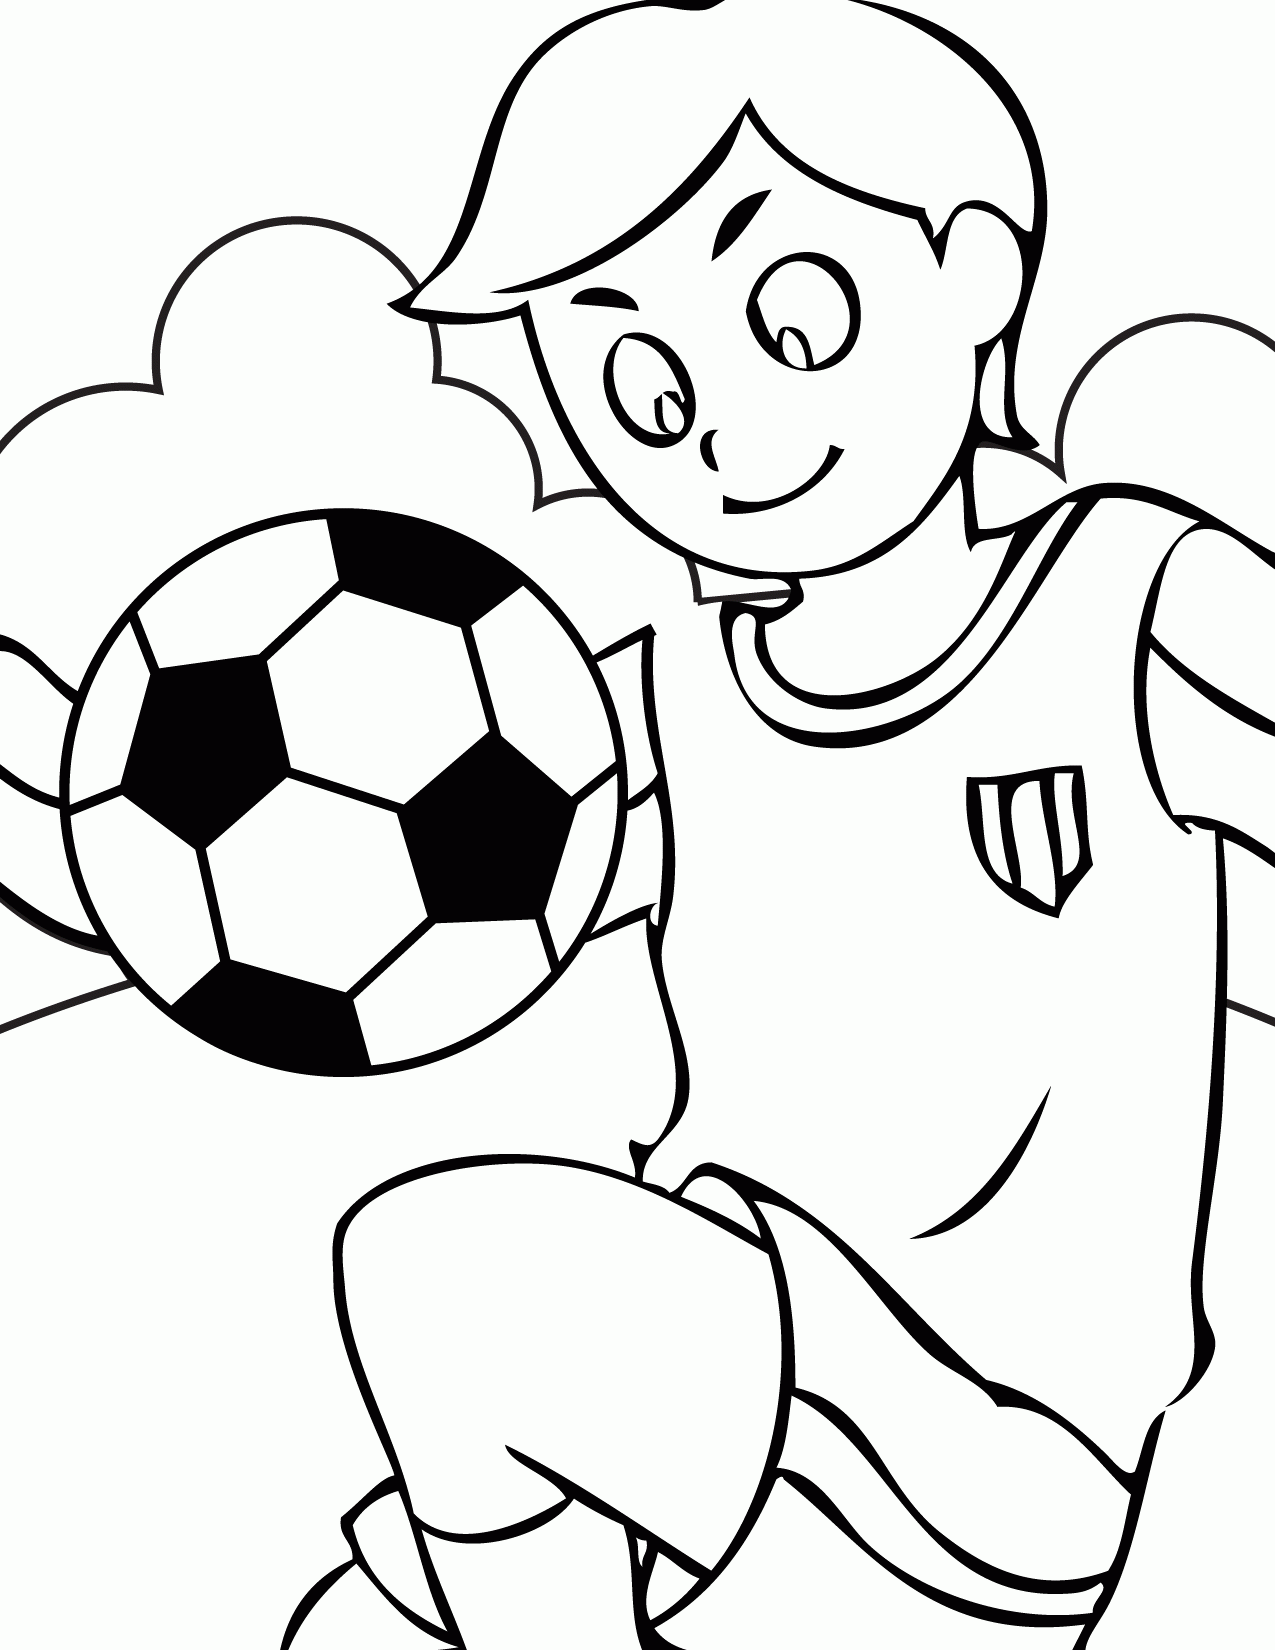 Soccer coloring pages 31 / Soccer / Kids printables coloring pages